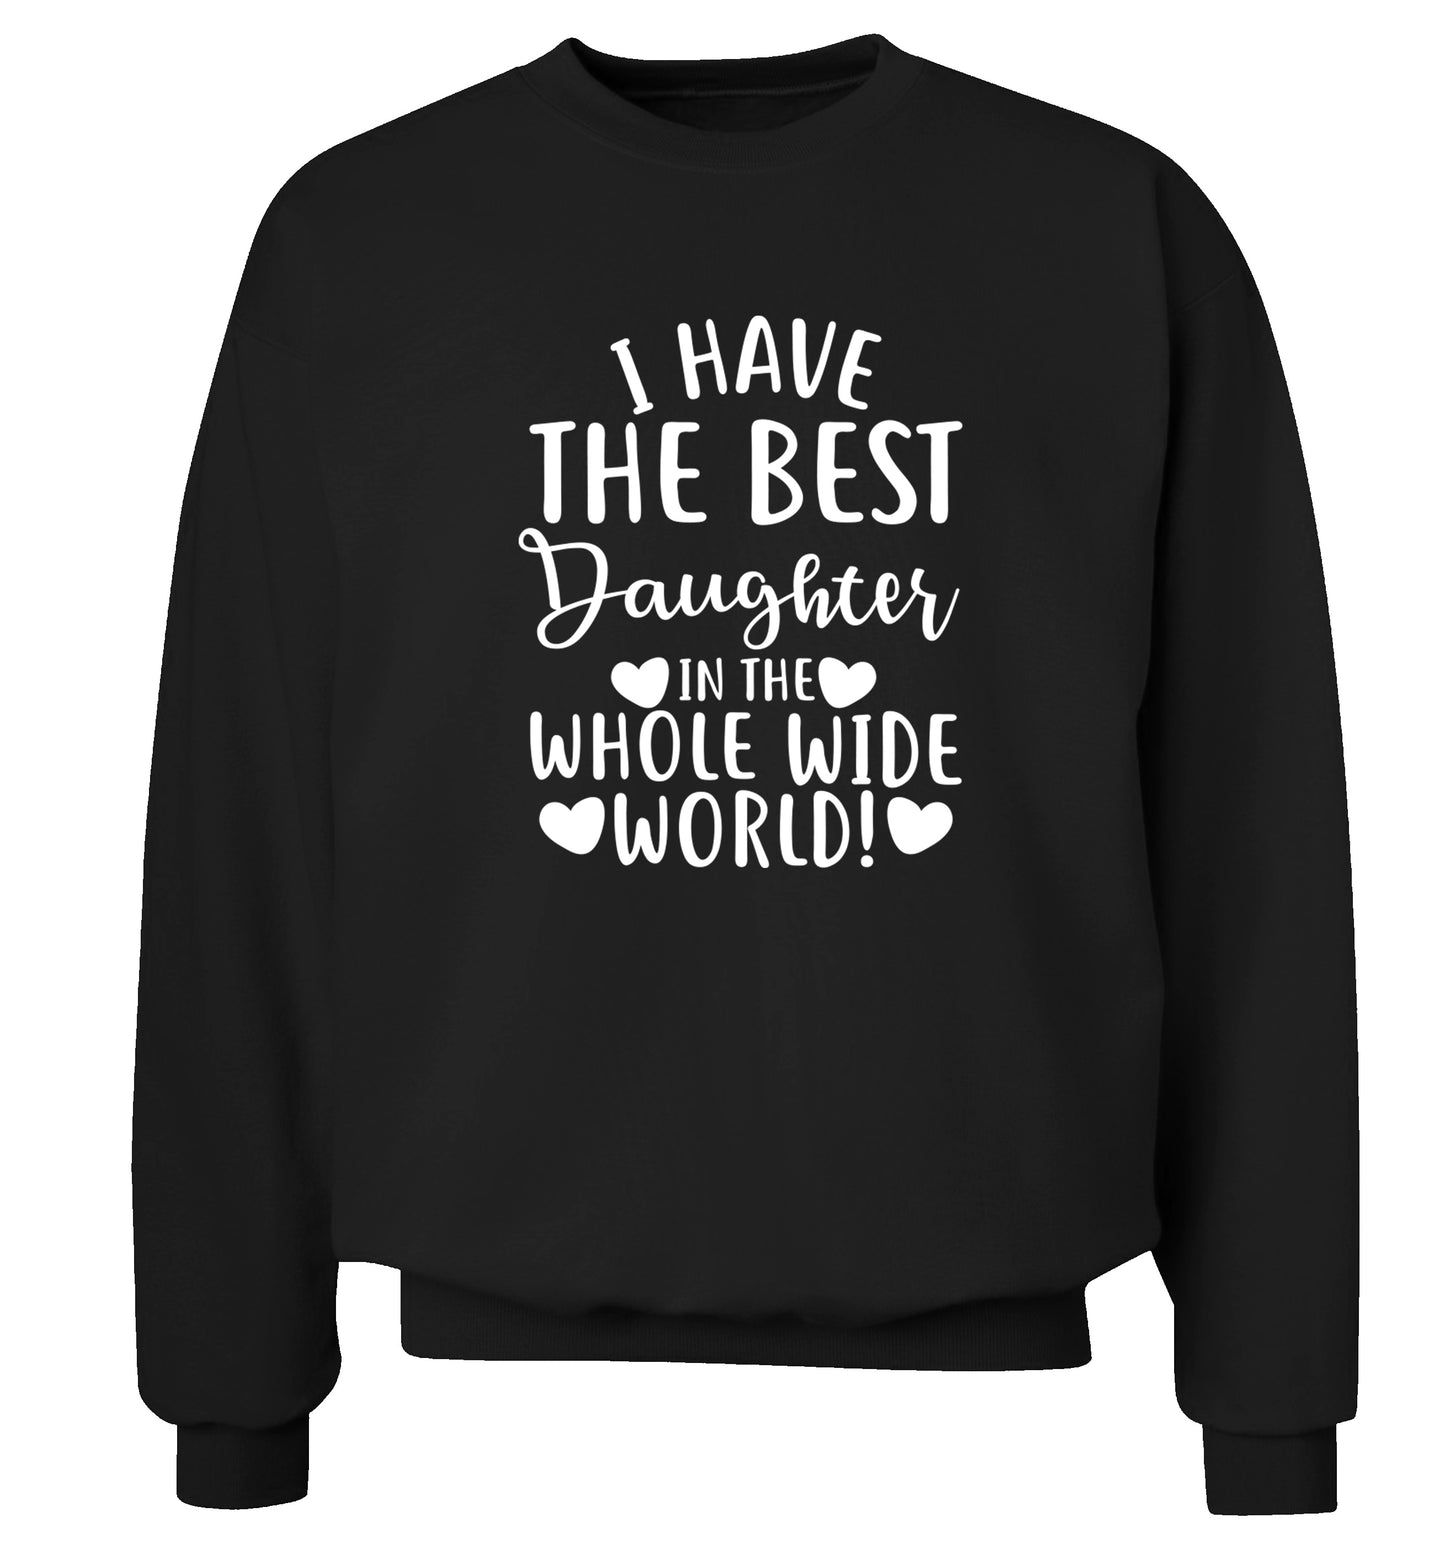 I have the best daughter in the whole wide world! Adult's unisex black Sweater 2XL